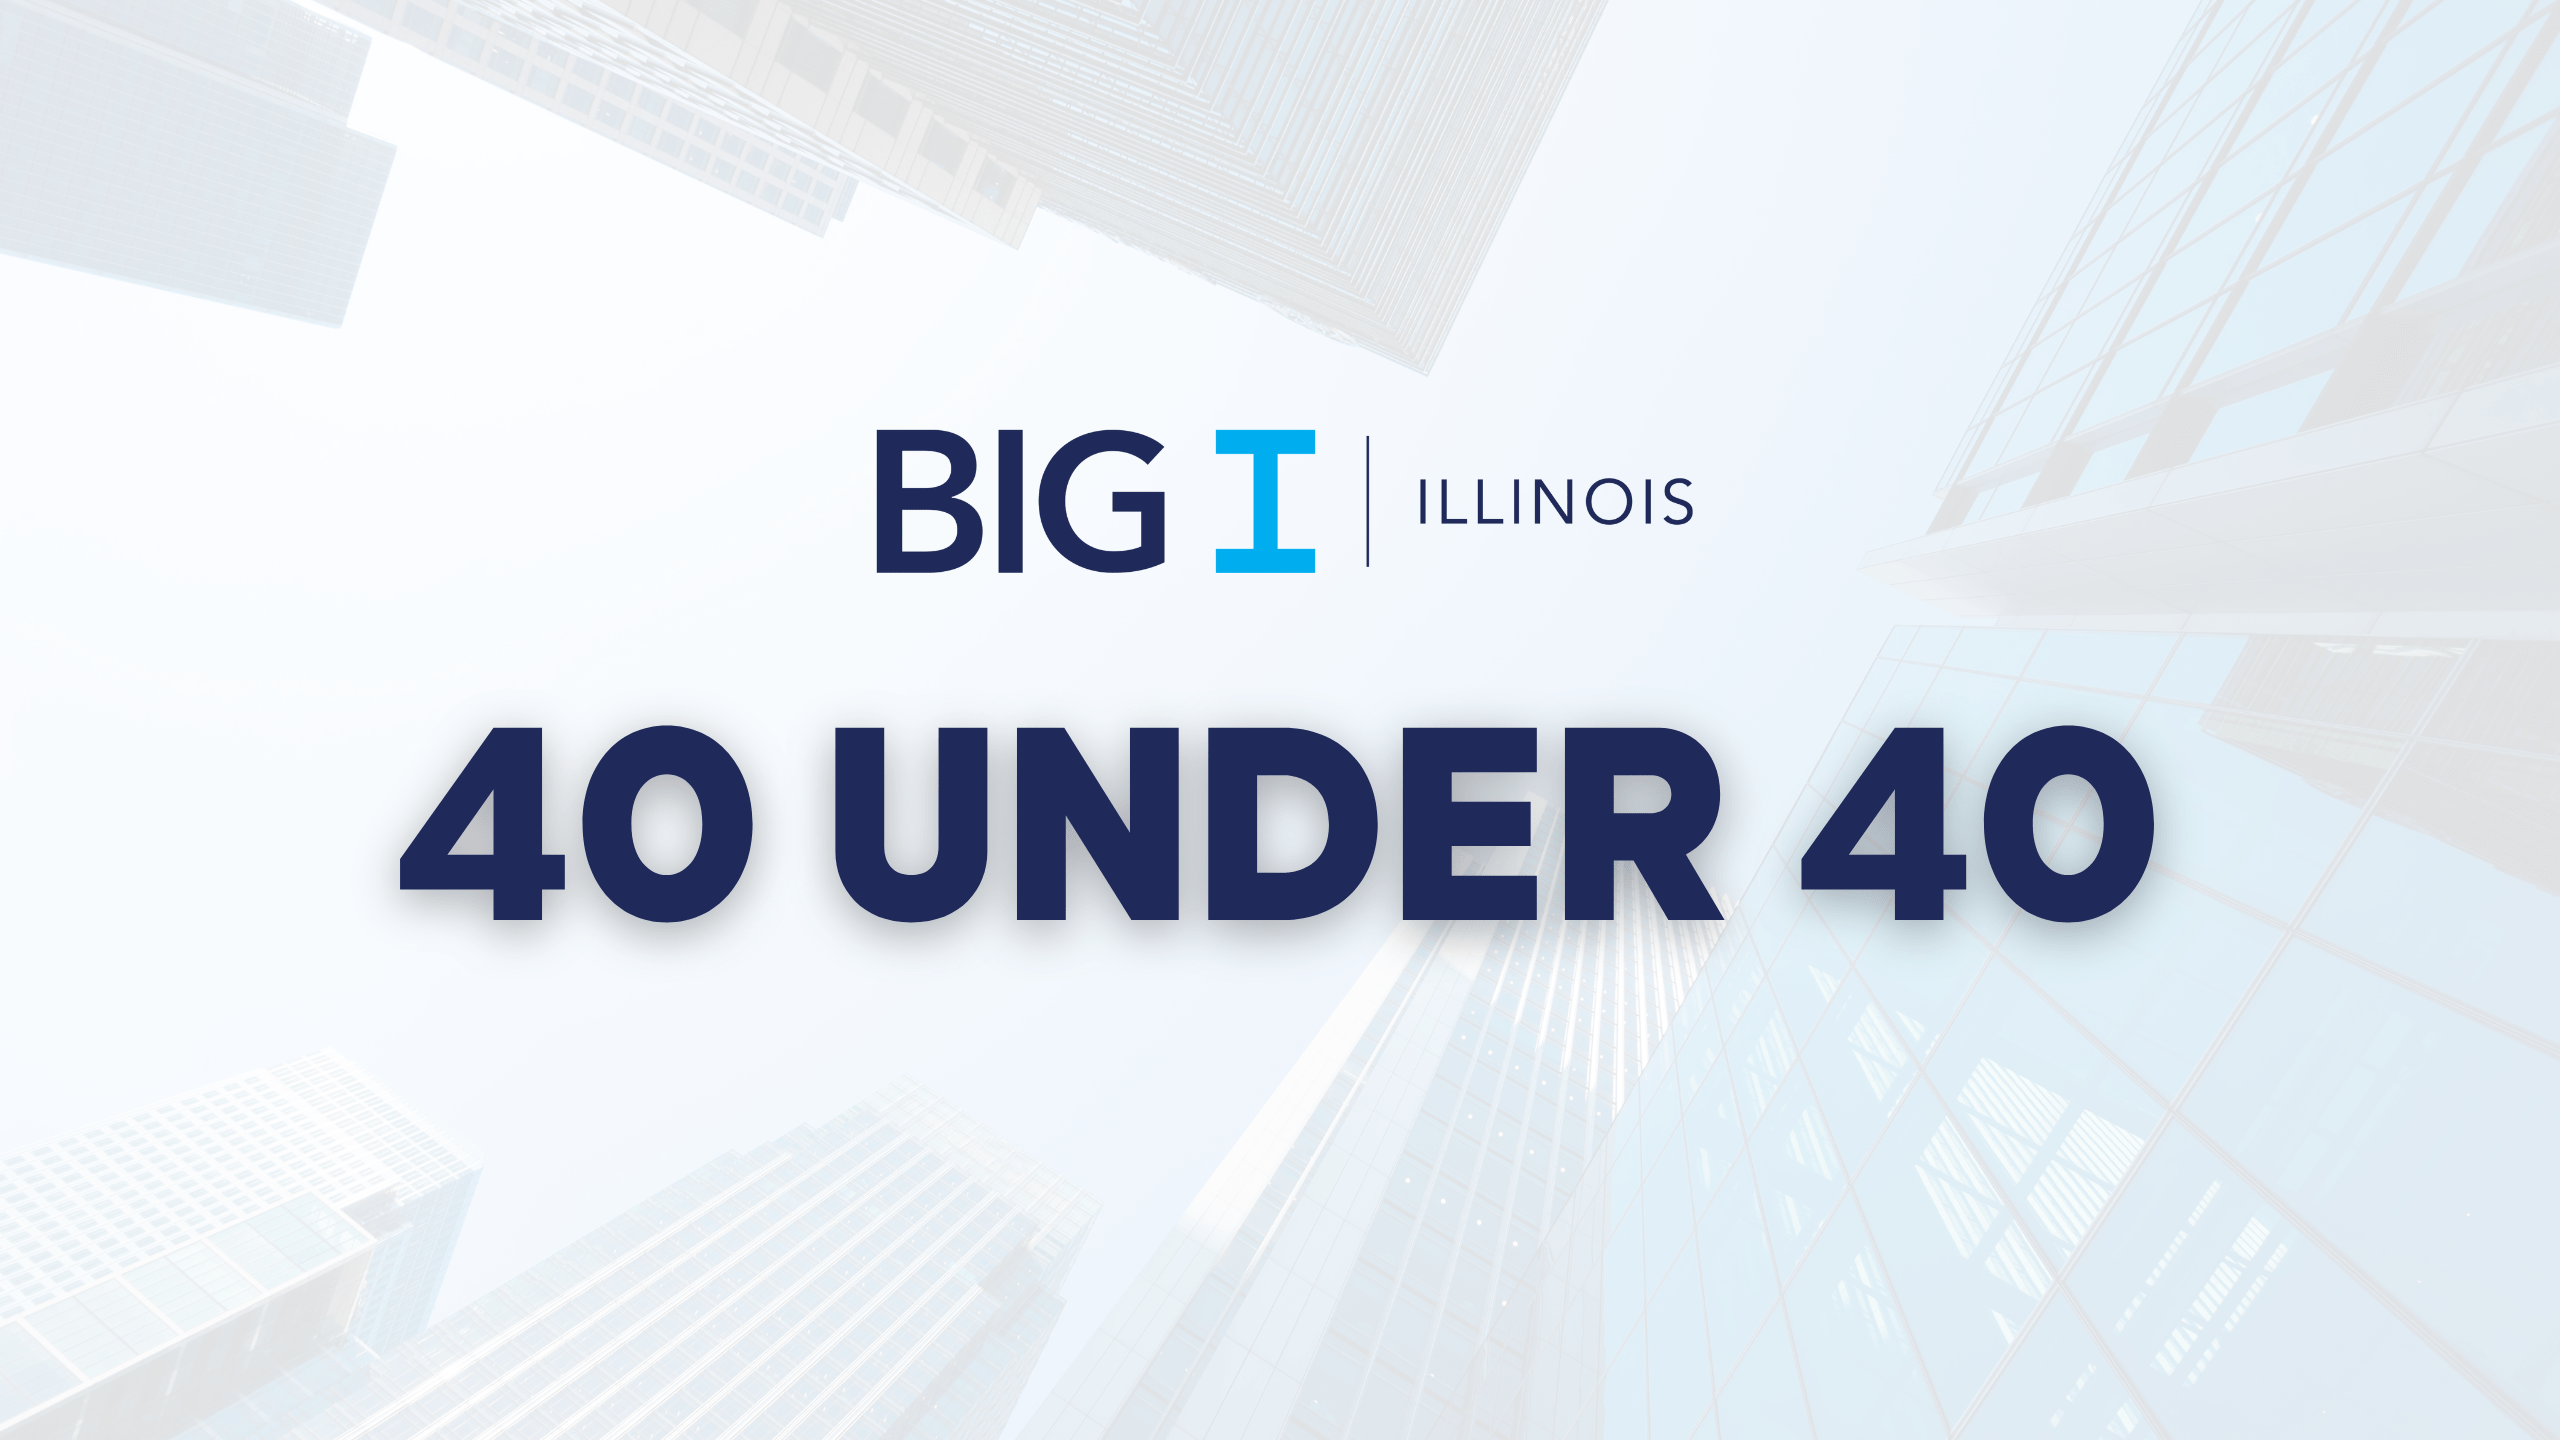 Compass Insurance Agent, Shane Robinson, Recognized in Big I of Illinois 40 Under 40